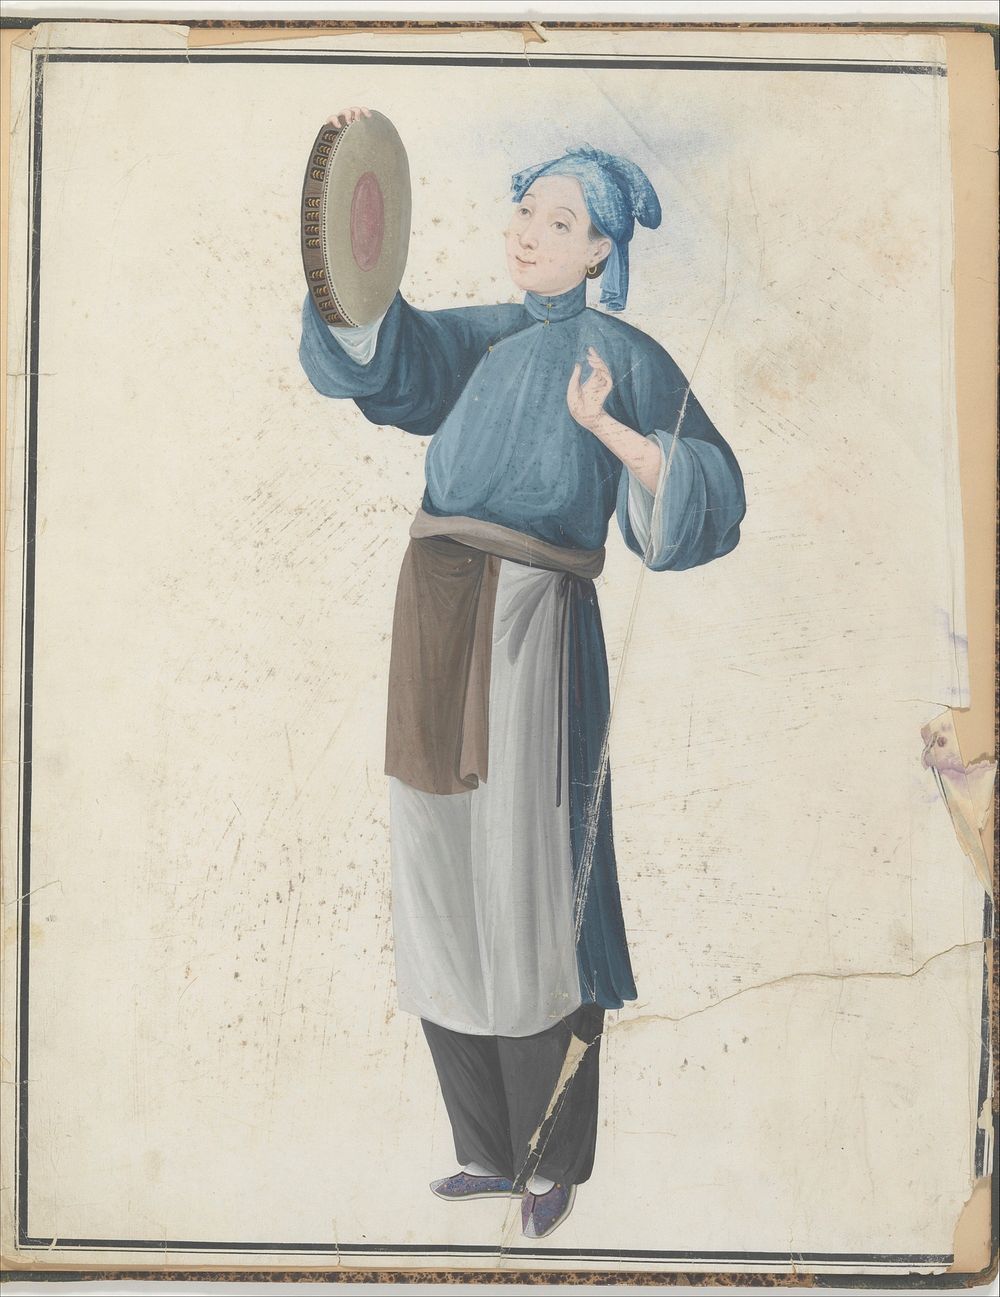 Watercolor of musician playing frame drum